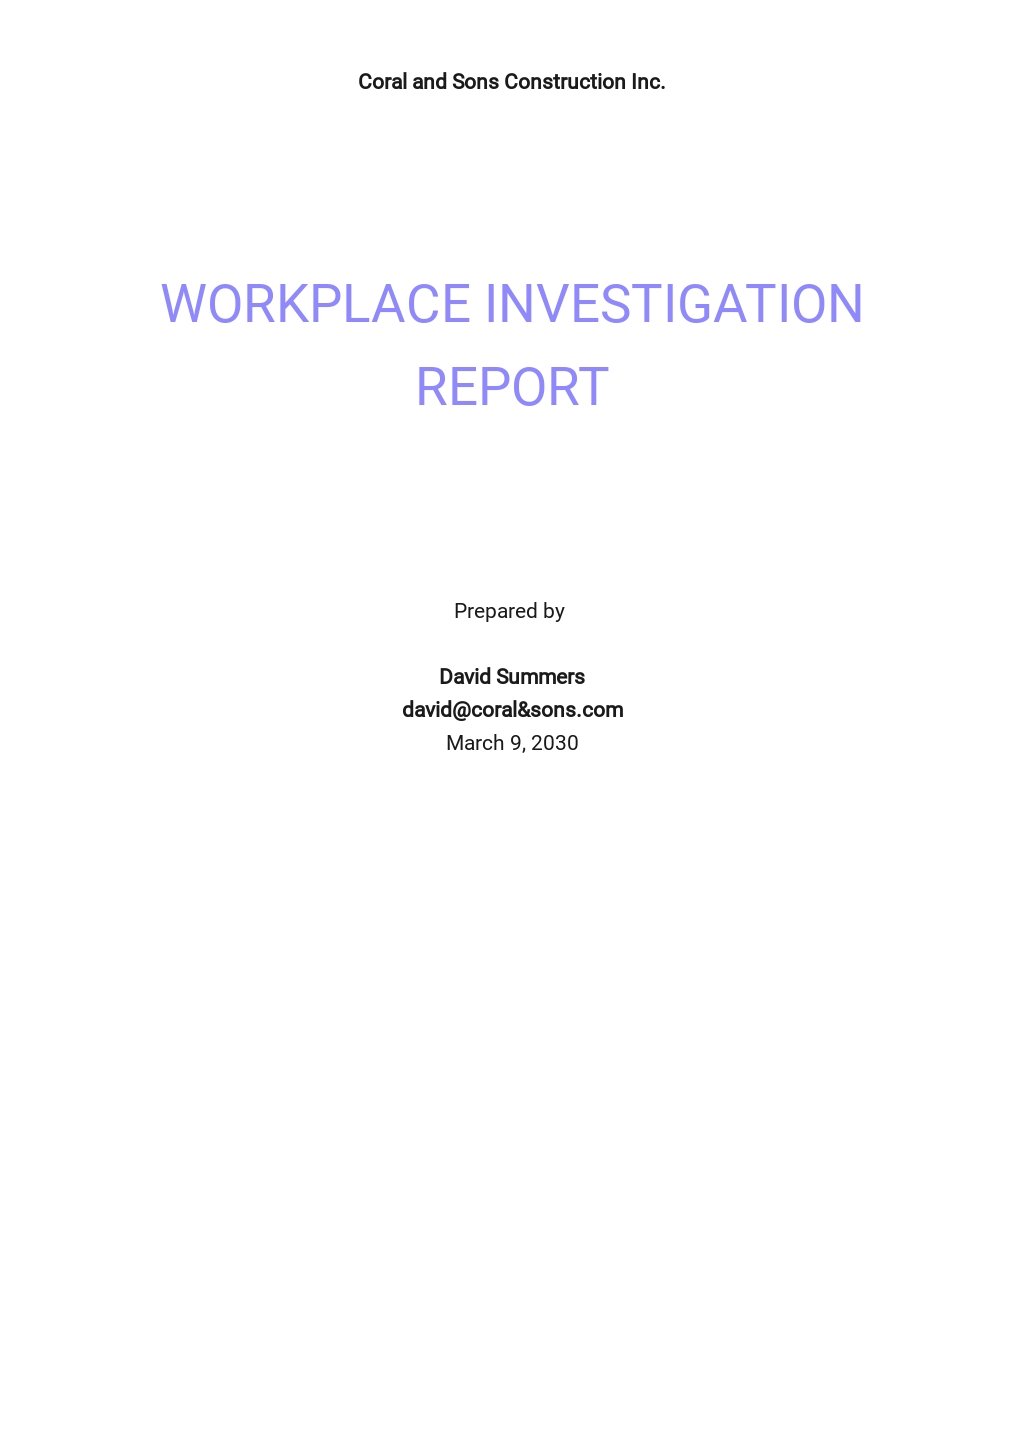 Workplace Investigation Report Template - Google Docs, Word For Workplace Investigation Report Template